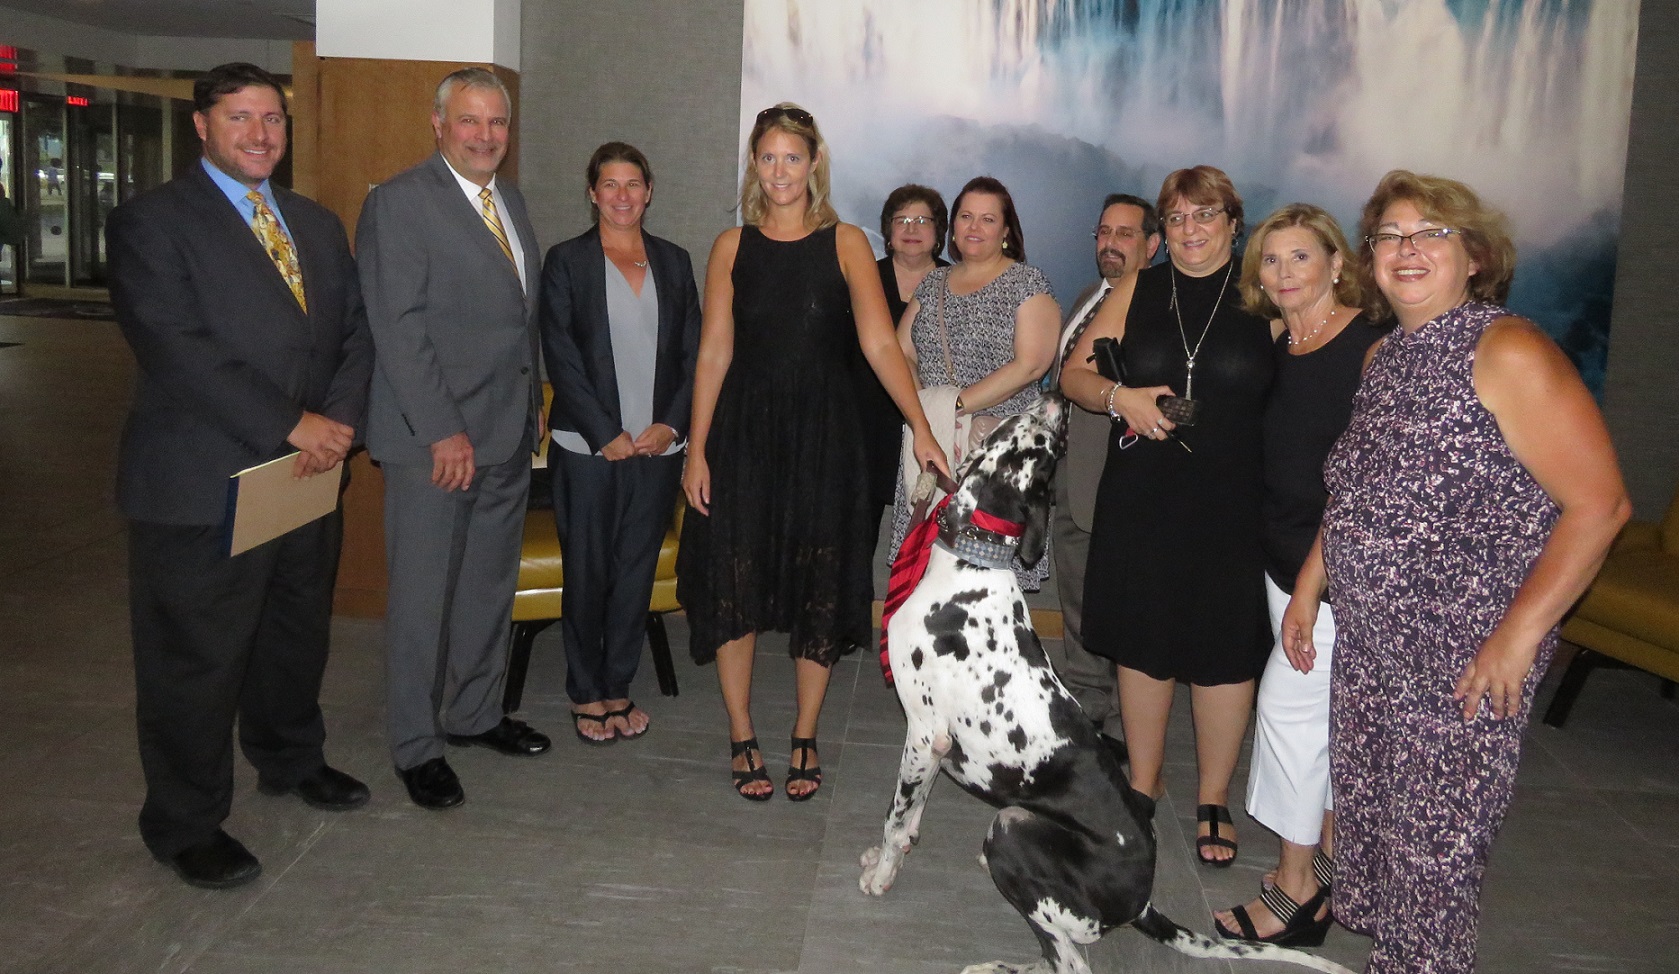 Niagara SPCA President Bob Richardson (left) alongside new Executive Director Tim Brennan, with current Executive Director Amy Lewis (middle, with her dog) and the rest of the SPCA board. (Photo by David Yarger)